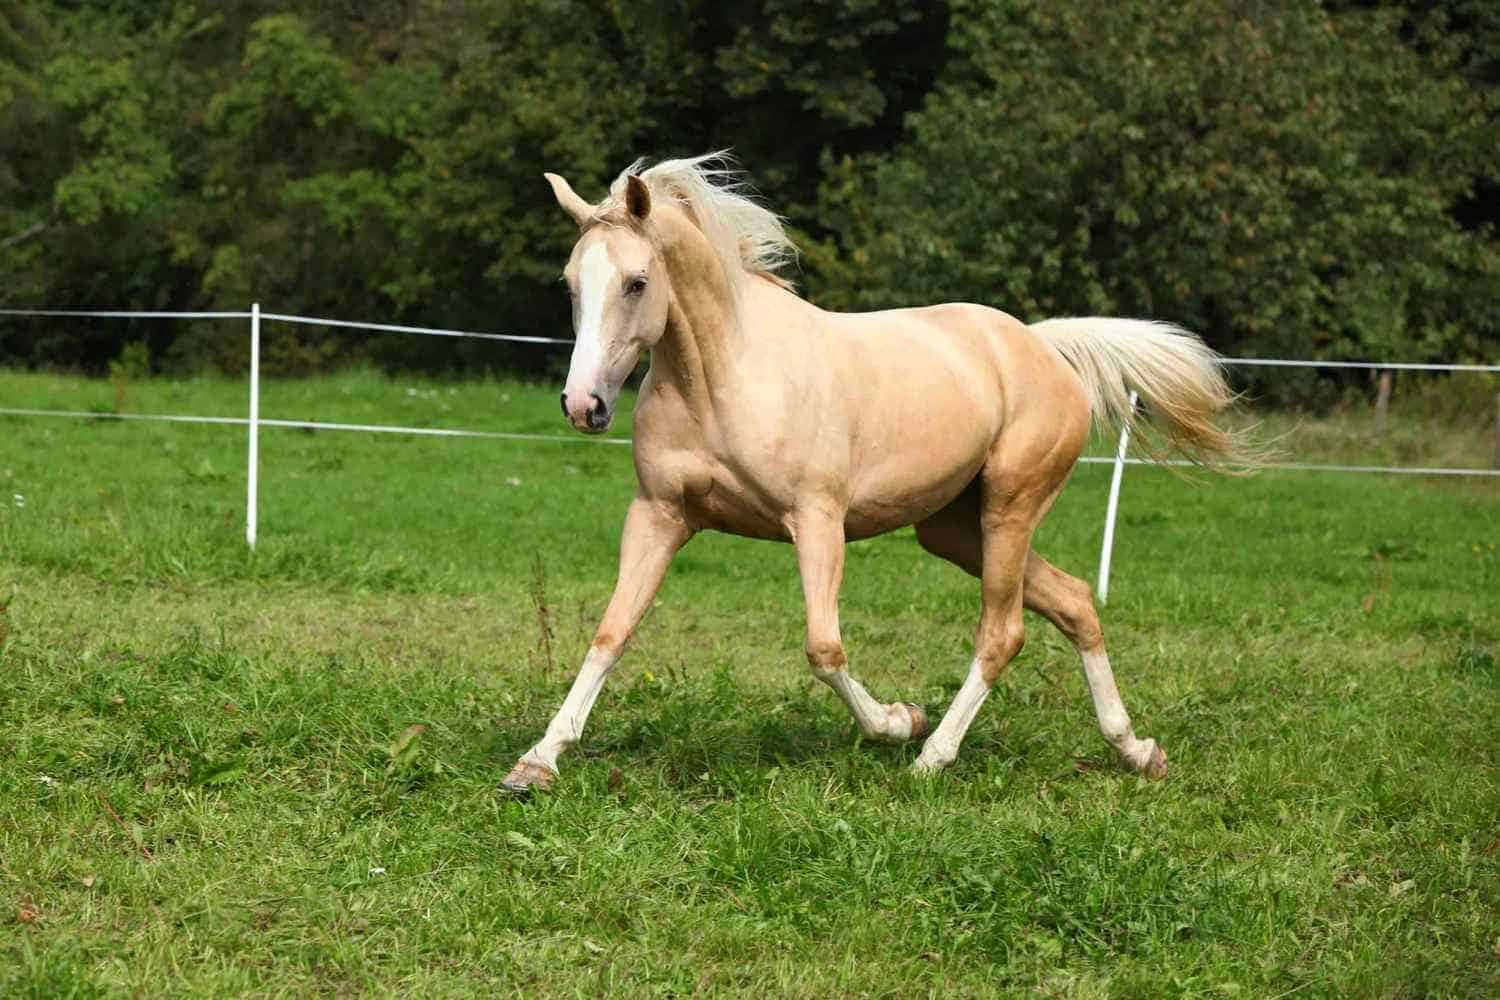 A beautiful Palomino Horse standing in a sunny field.